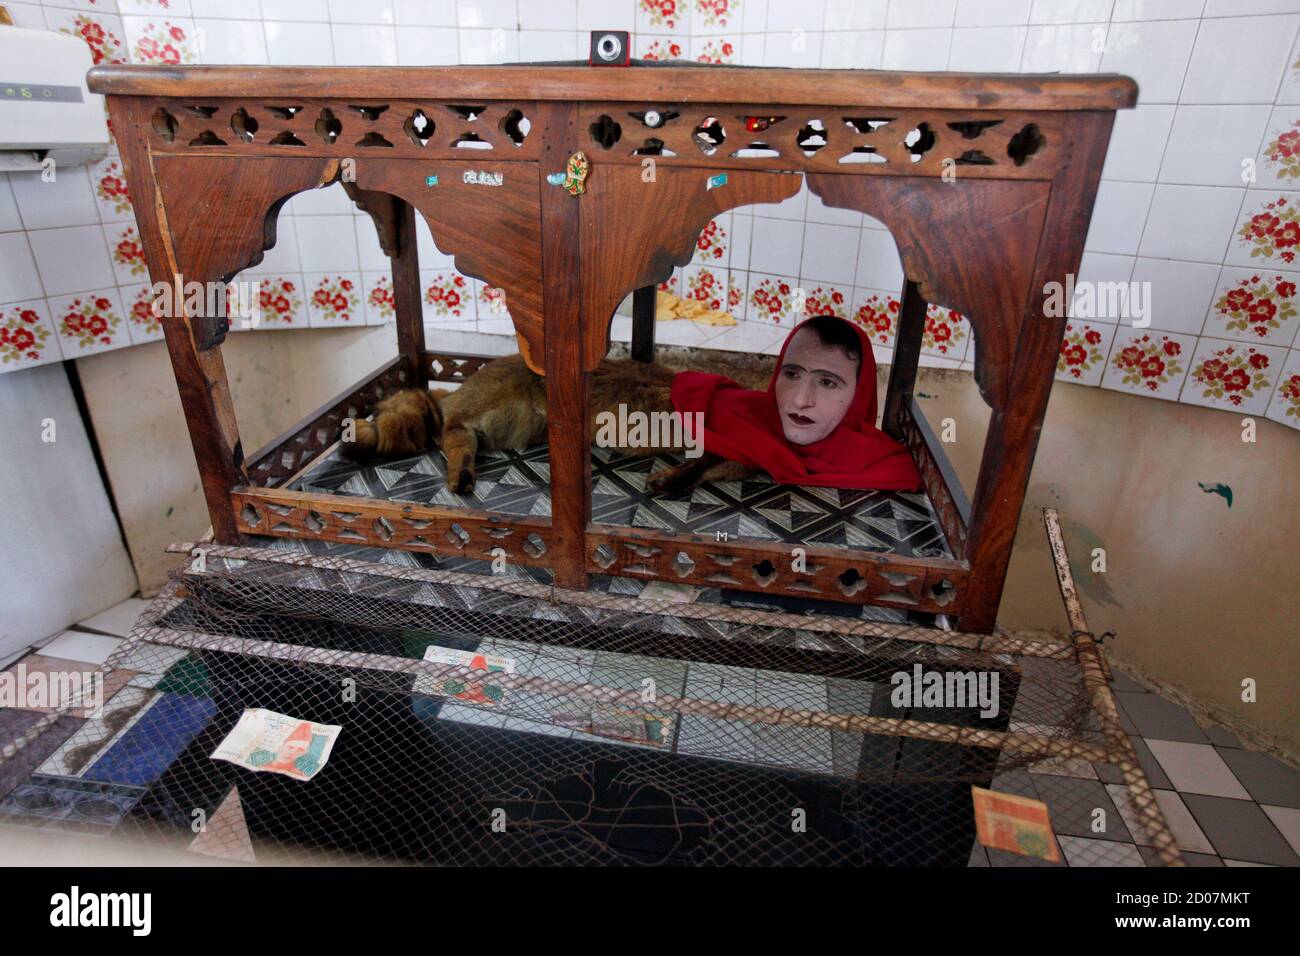 An entertainer performing as the character 'Mumtaz Begum', a fox-human hybrid creature, sits inside a wooden canopy in a small room called Mumtaz Mahal (Mumtaz Palace), to amuse visitors at Karachi Zoo in Karachi June 20, 2014. Picture taken June 20, 2014. REUTERS/Akhtar Soomro (PAKISTAN - Tags: SOCIETY ANIMALS) Stock Photo